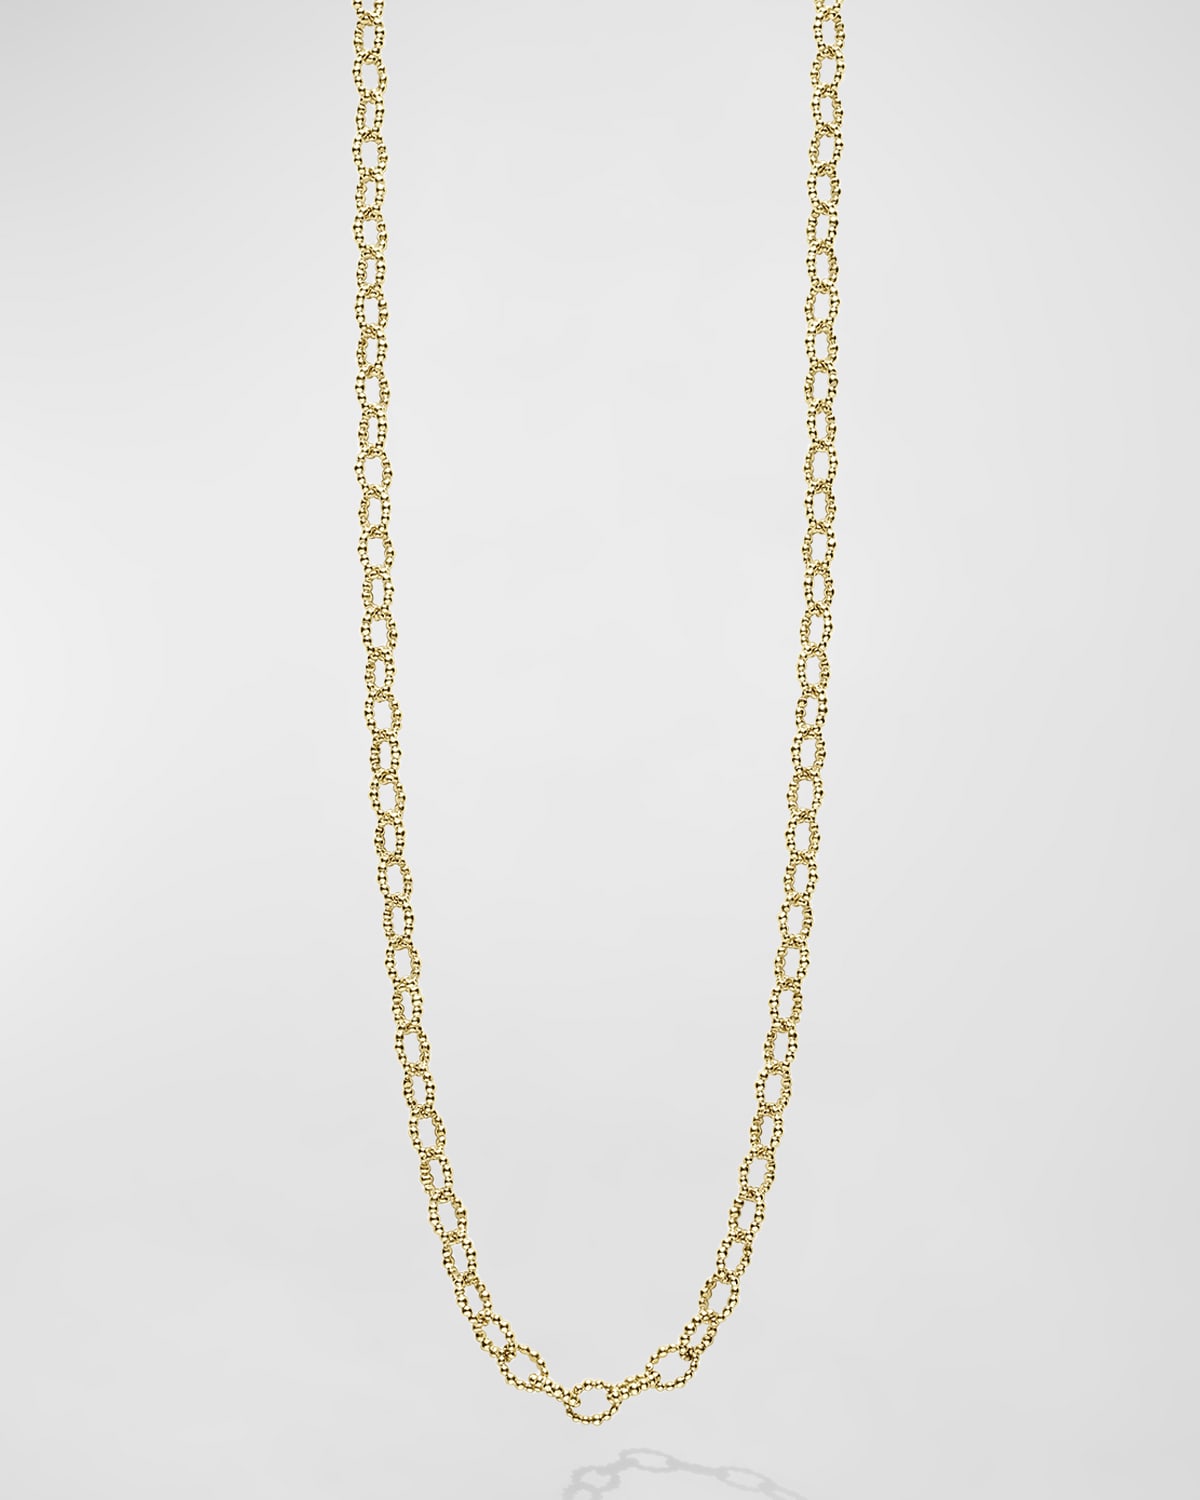 Lagos 18k Signature Caviar 4x3mm Oval Link Chain Necklace, 18"l In Gold